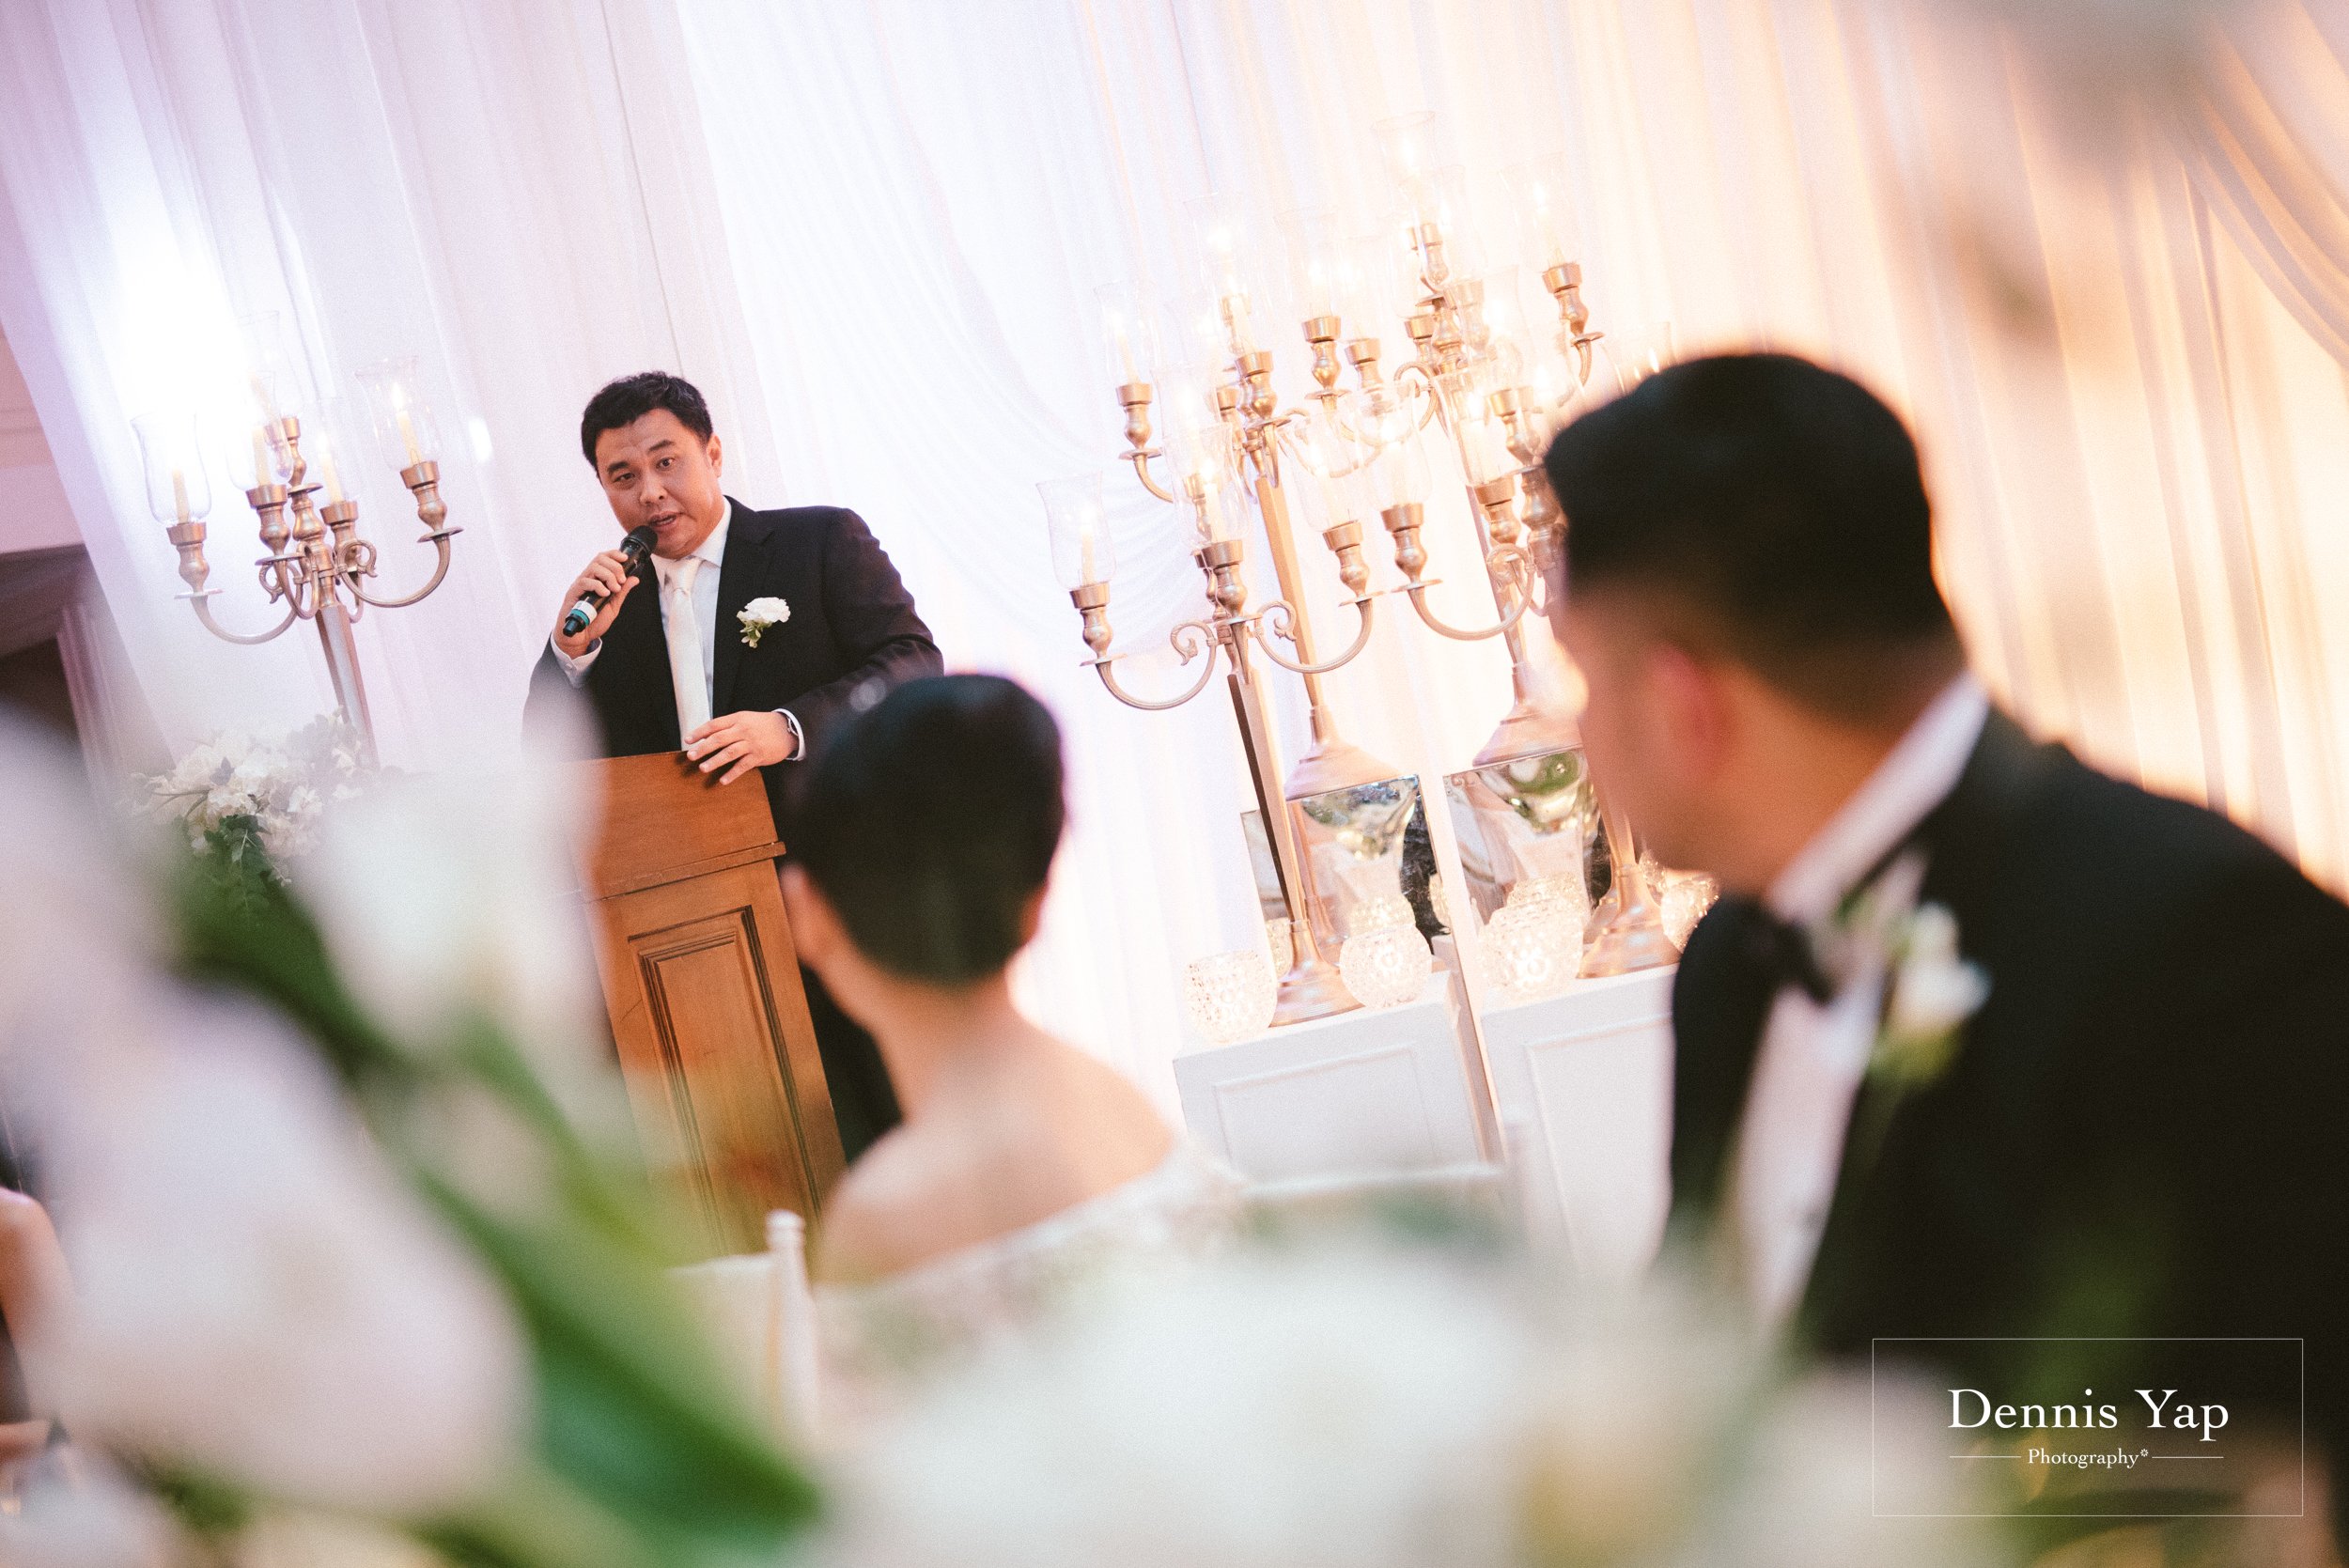 beng seong caring E and O hotel the occasion wedding planner awesome decoration dennis yap photography malaysia top wedding photographer-11.jpg